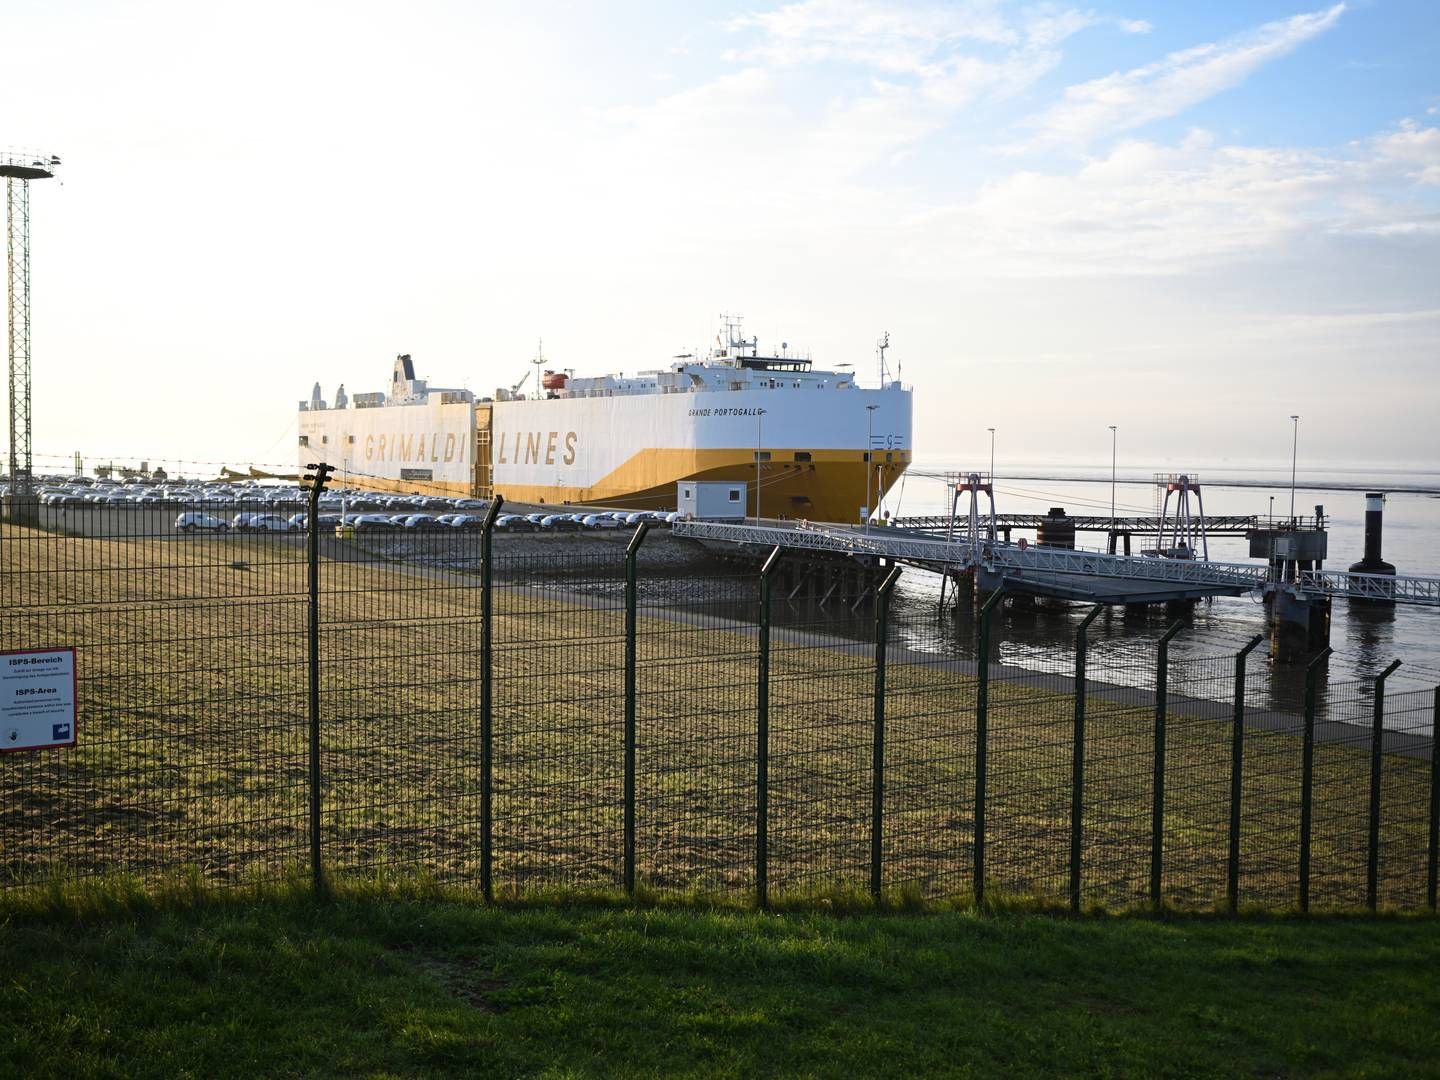 Car carrier in the Port of Emden, one of the ports in the German state of Lower Saxony, which fear that cost-cutting will slow down their development. | Photo: Lars Penning/AP/Ritzau Scanpix